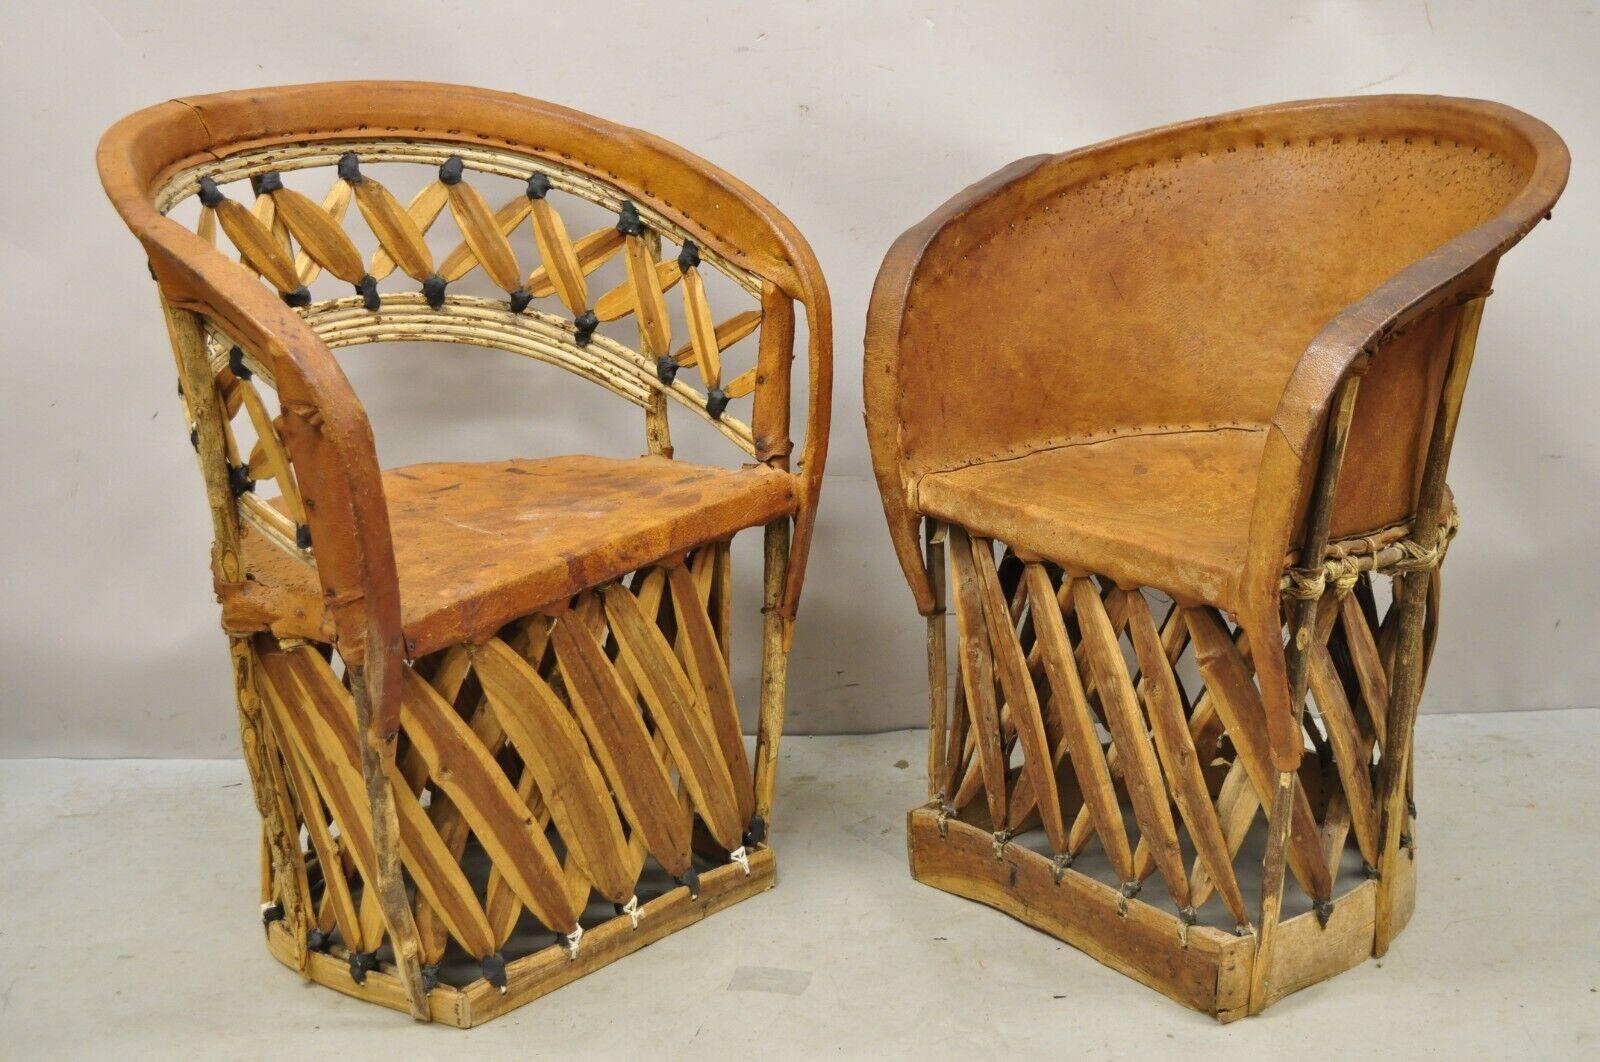 Vintage Brown Leather and Cedar Wood Mexican Equipale Barrel Club Chairs a Pair. Item features 